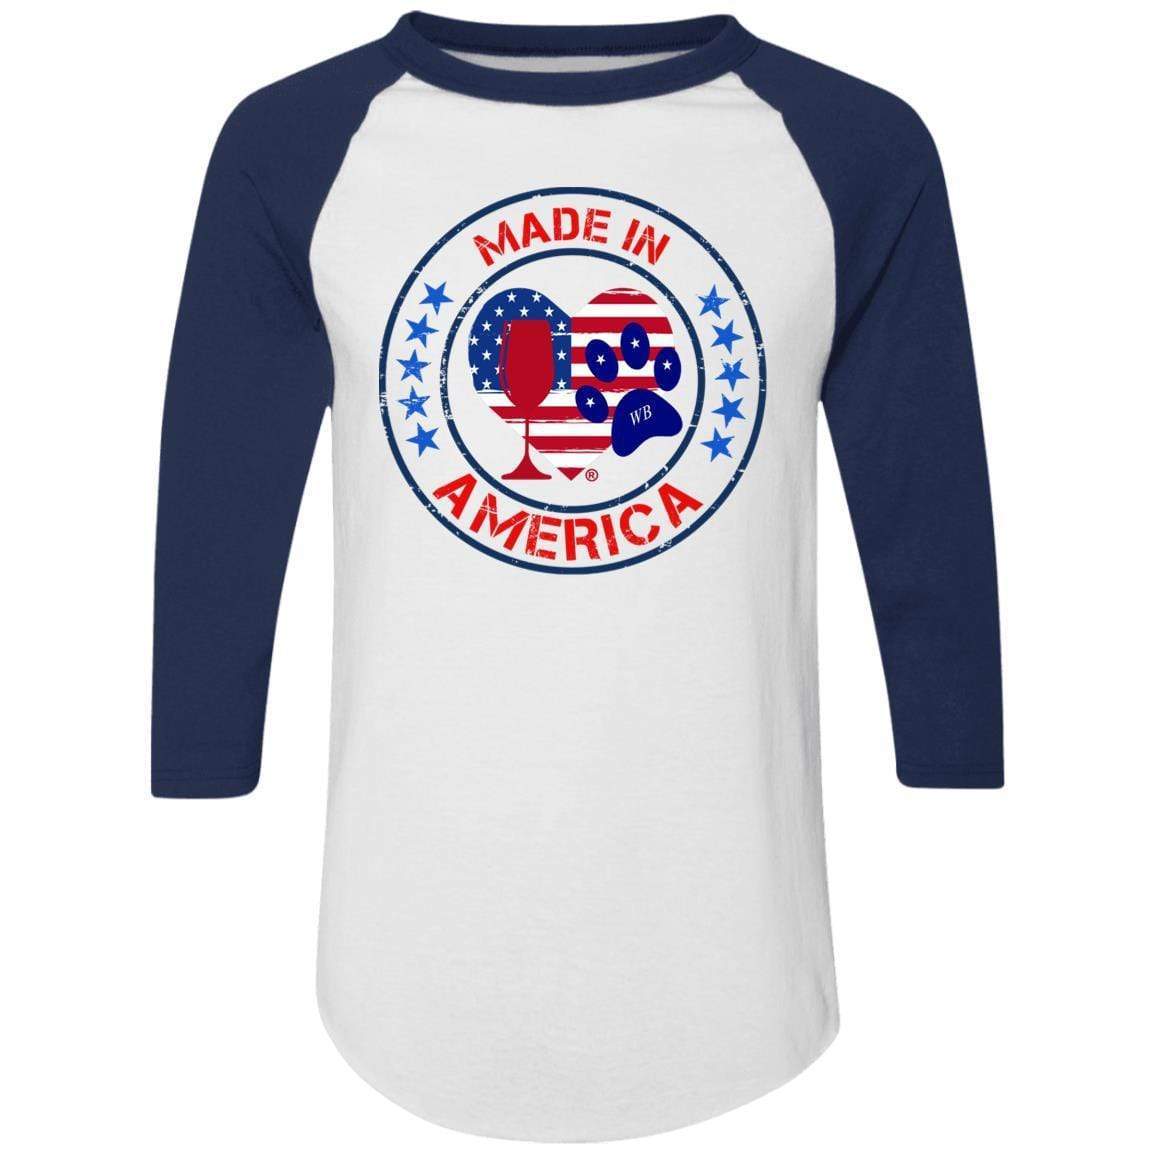 T-Shirts White/Navy / S Winey Bitches Co "Made In America" Colorblock Raglan Jersey WineyBitchesCo